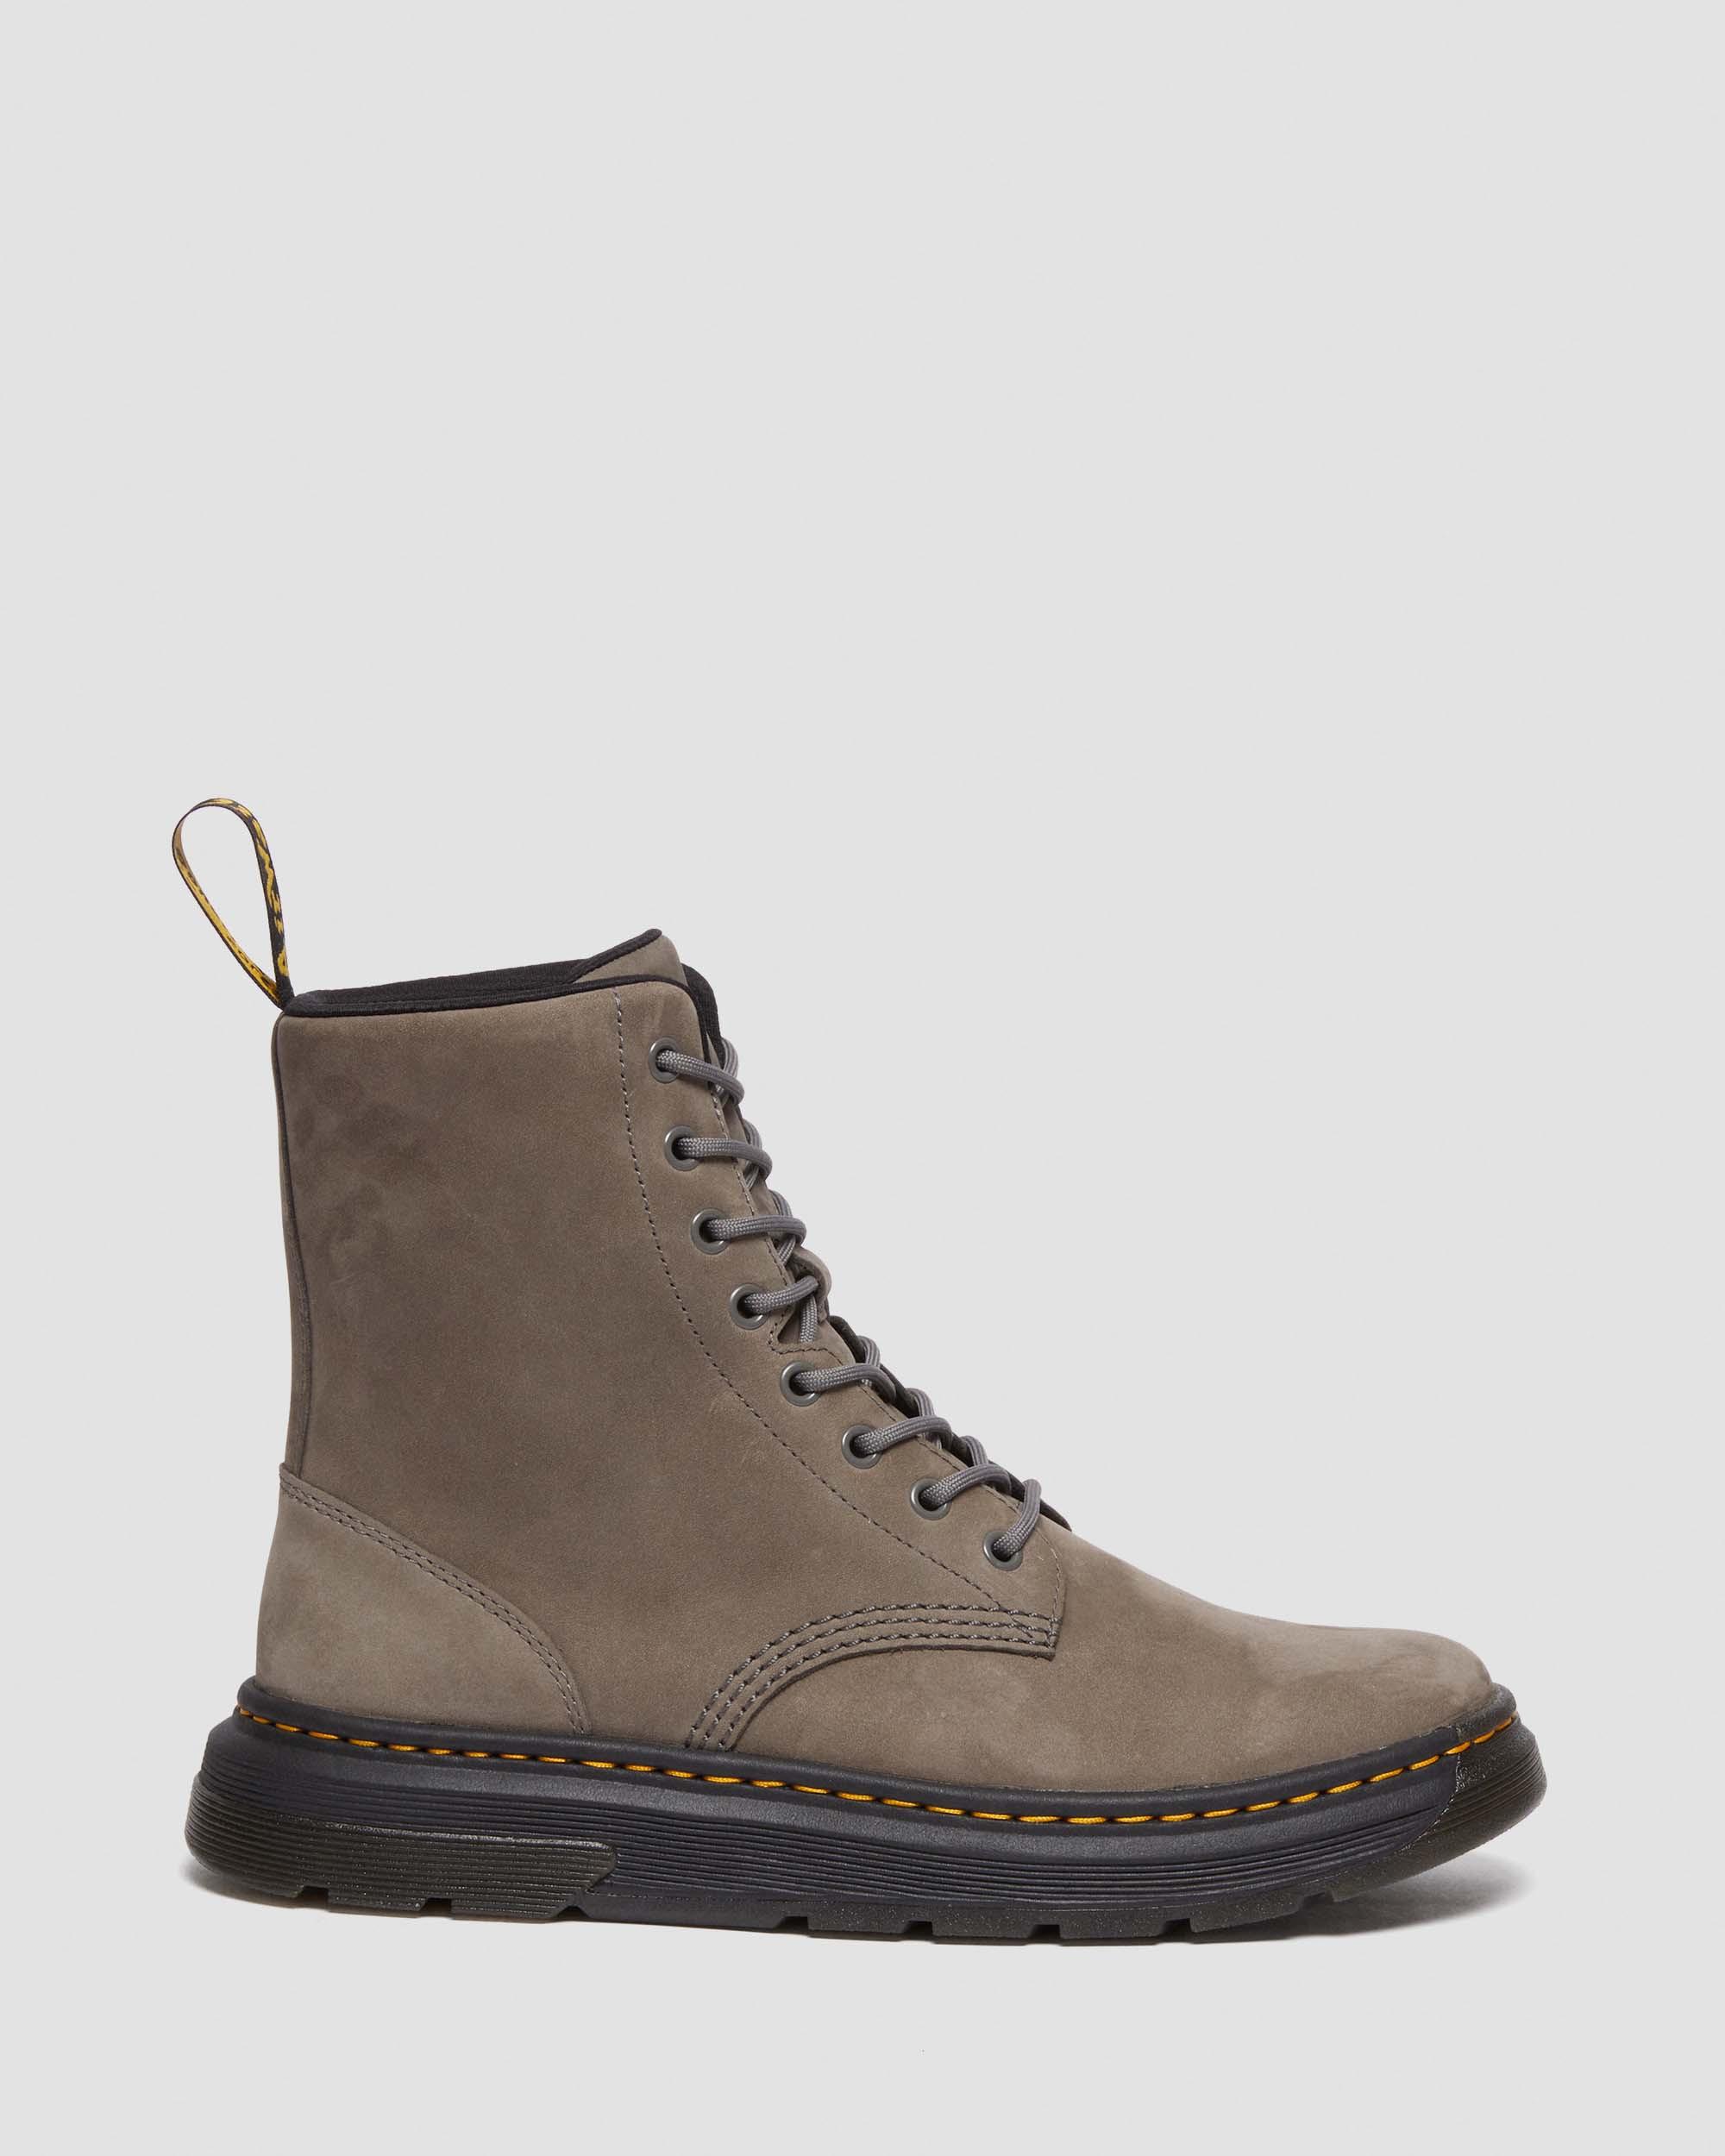 Crewson Leather Lace Up BootsCrewson Leather Lace Up Boots Dr. Martens